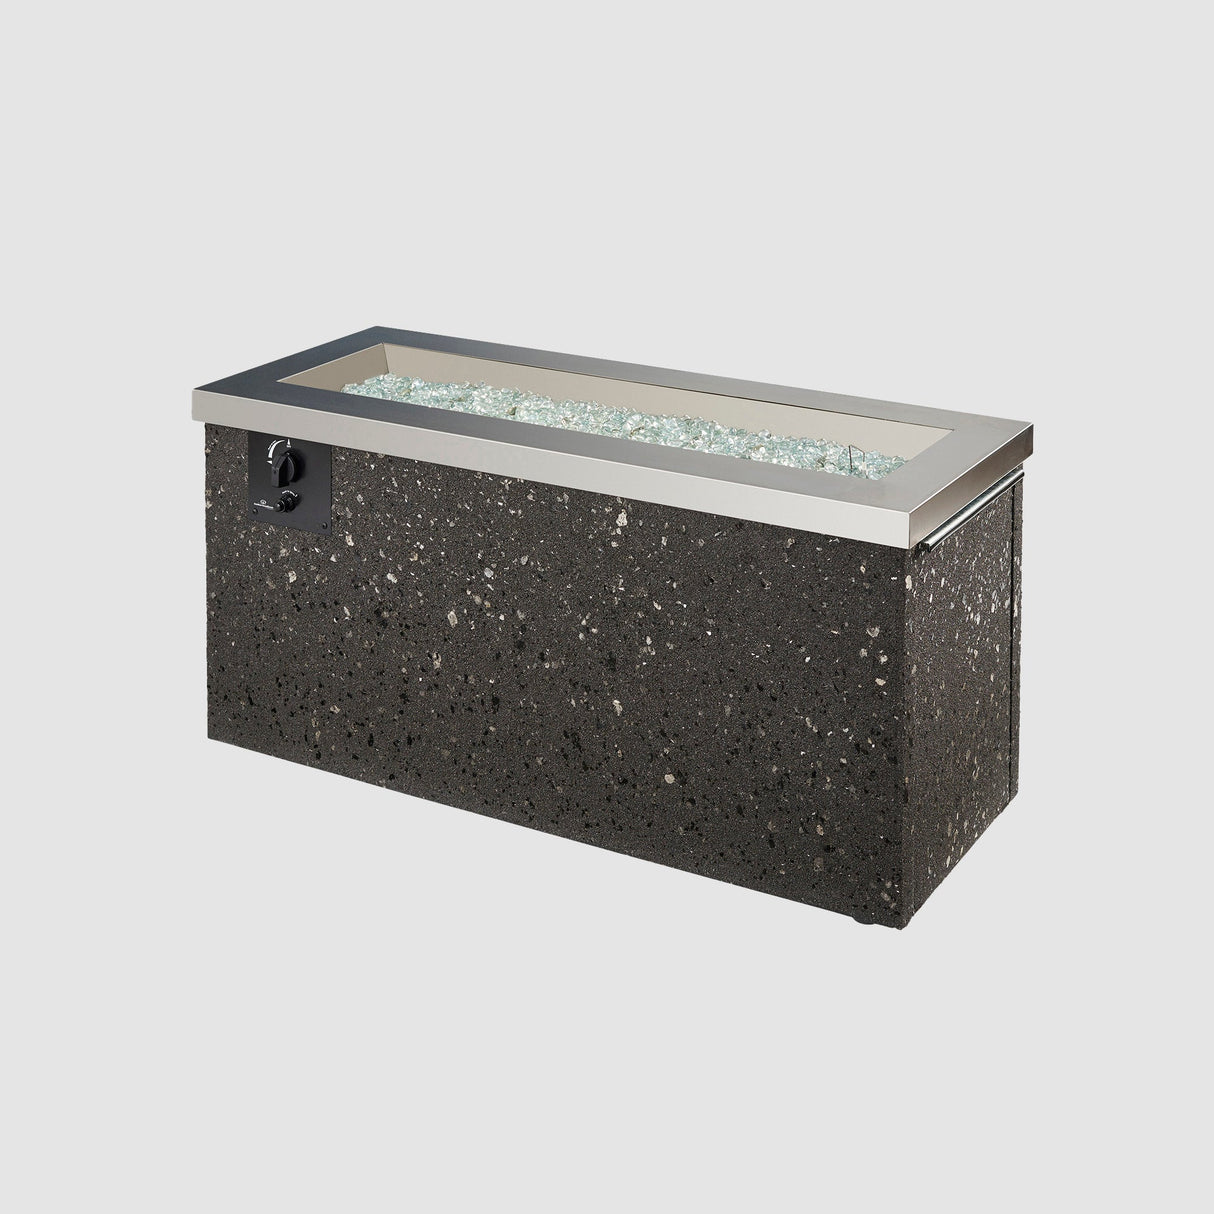 Stainless Steel Key Largo Linear Gas Fire Pit Table with fire media on top of the burner on a grey background